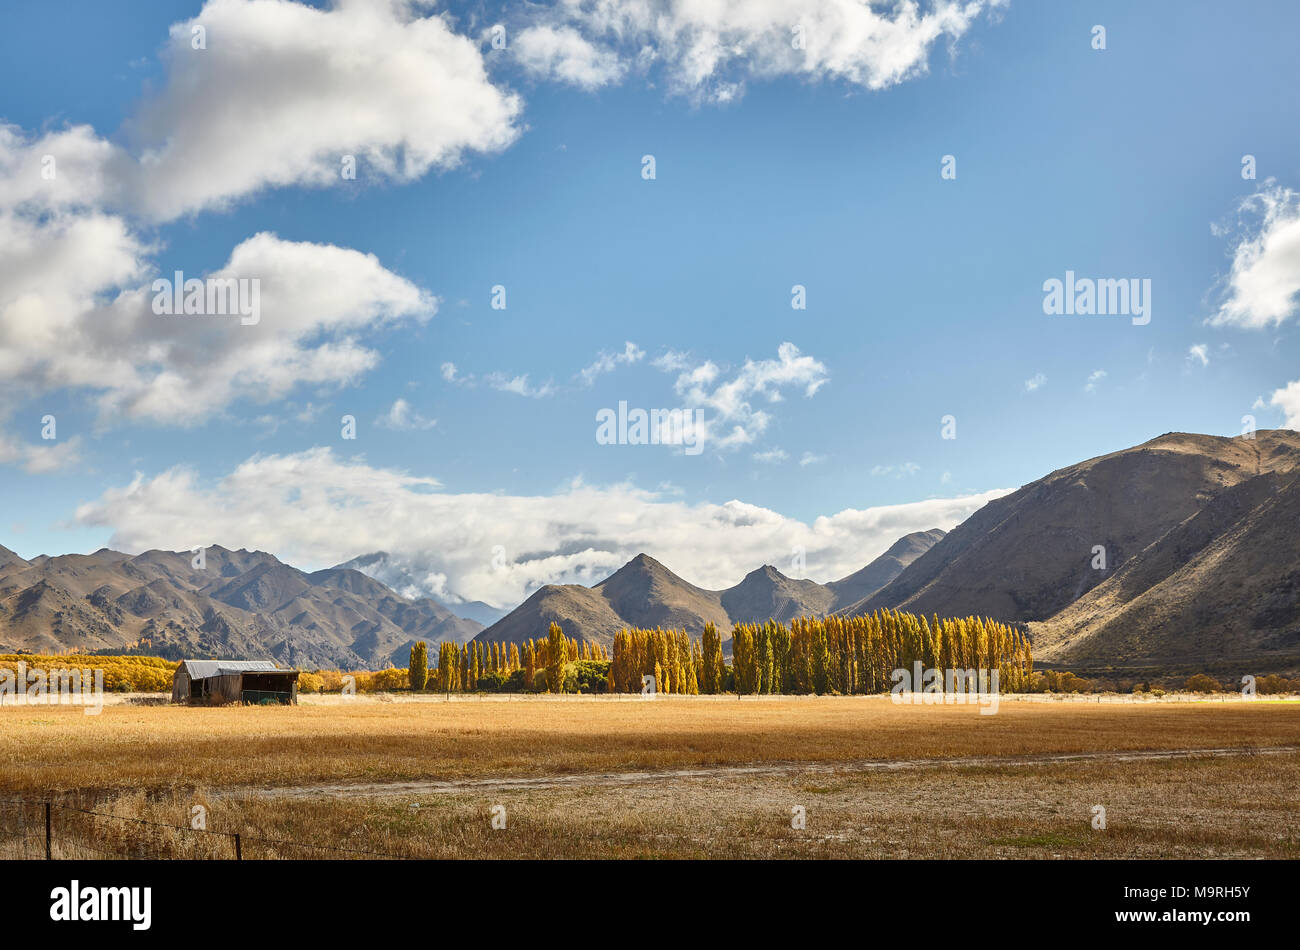 Looking towards Otemata with a line of fern trees, a barn and mountain range in the background. South Island, New Zealand, NZ Stock Photo